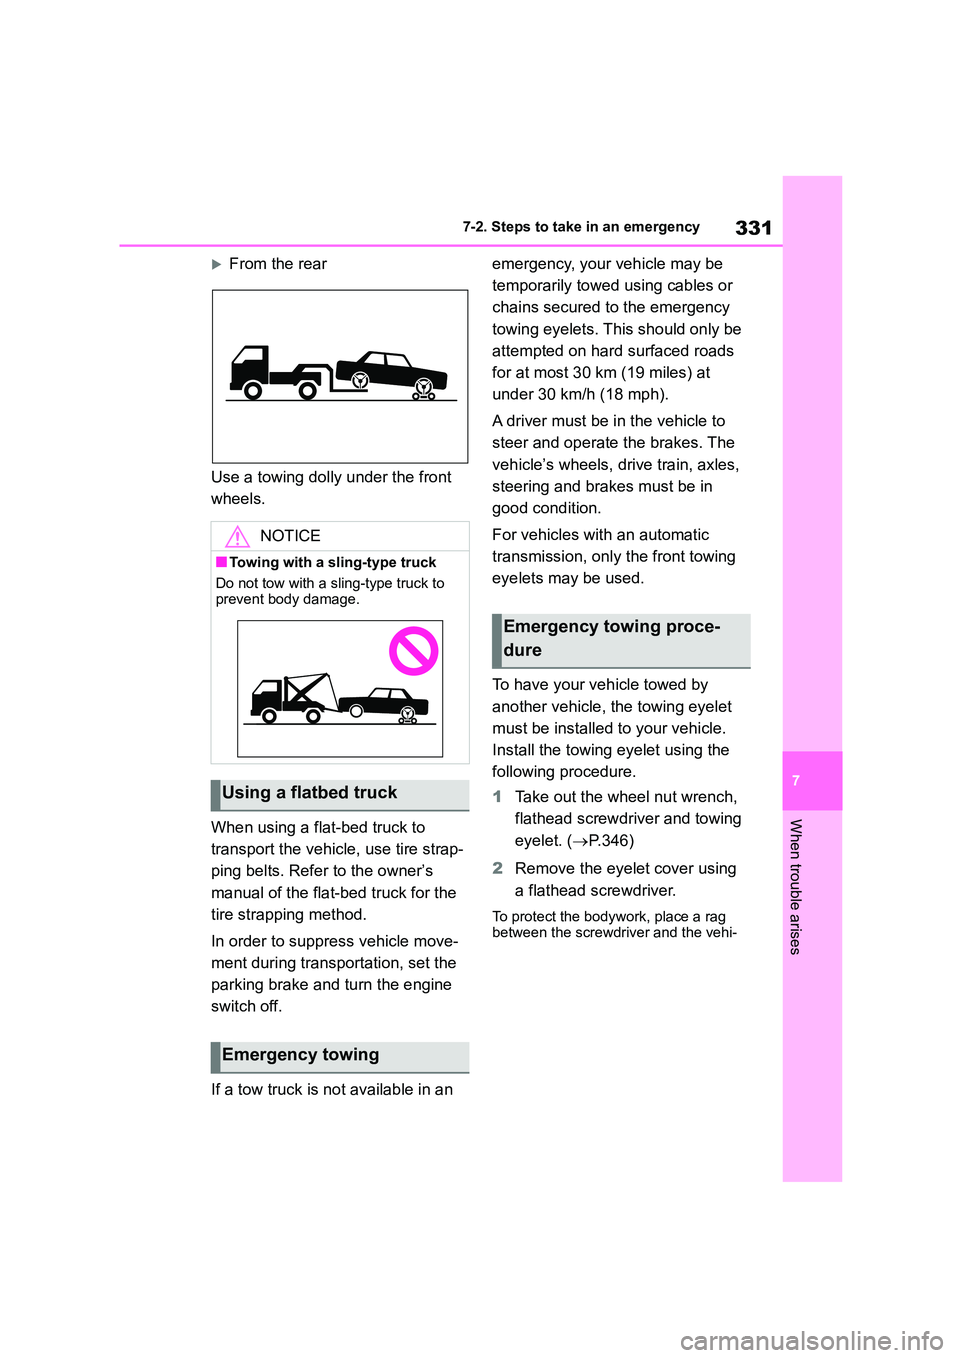 TOYOTA GR86 2022   (in English) User Guide 331
7 
7-2. Steps to take in an emergency
When trouble arises
From the rear 
Use a towing dolly under the front  
wheels. 
When using a flat-bed truck to  
transport the vehicle, use tire strap-
pi